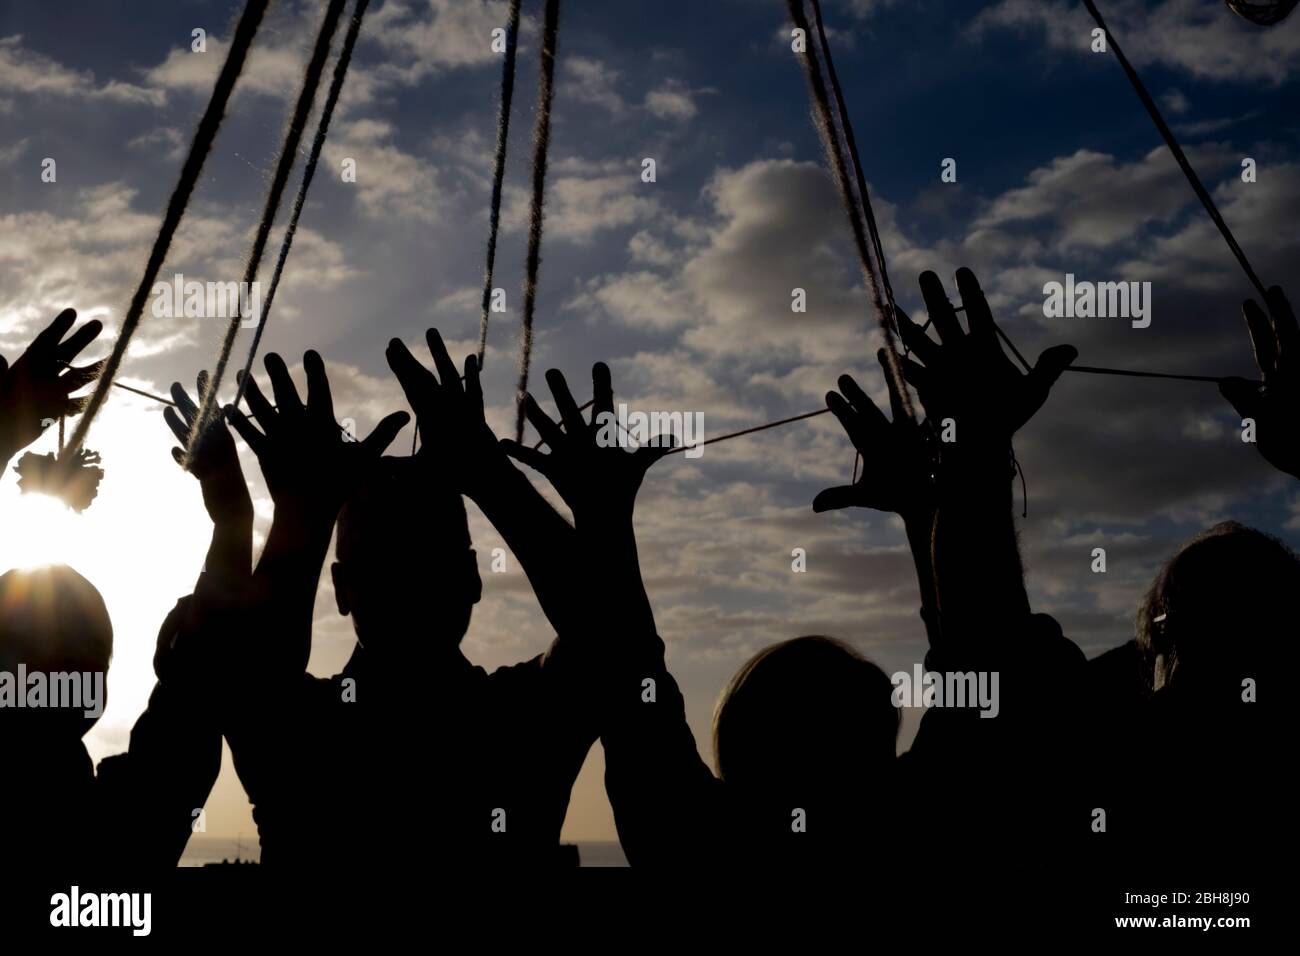 group of hands in silhouette with cords to put them together united for friendship and cooperation concept - dark images with team people Stock Photo